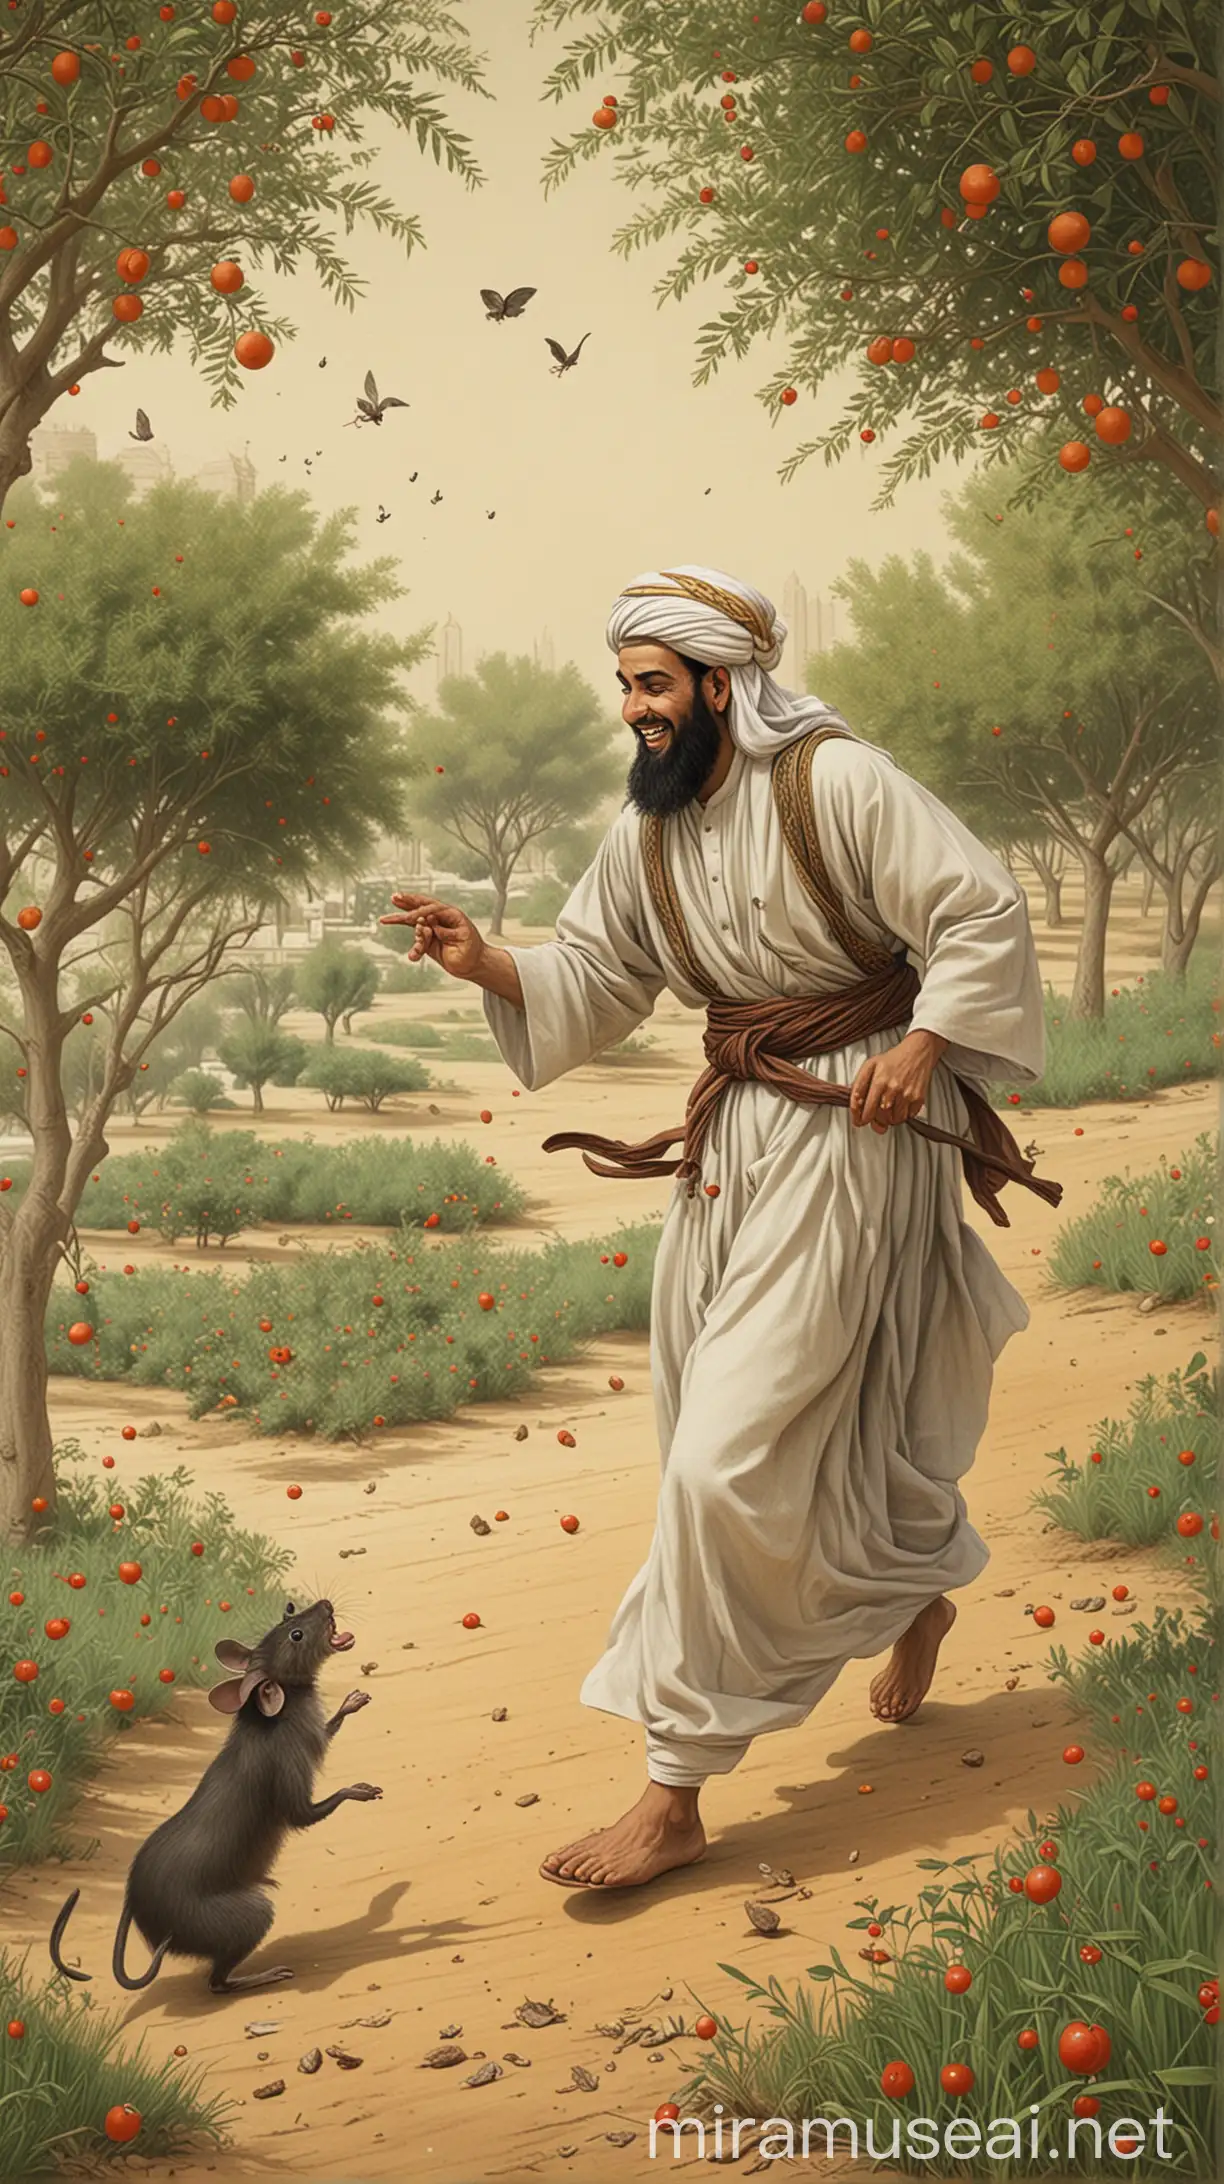  A drawing of Hazrat Abu Huraira (RA) playfully chasing a mischievous mouse in a date orchard.
Description: Abu Huraira (RA) is shown with a mischievous smile on his face, trying to catch the playful mouse that stole dates, reminiscent of the lighthearted incident he joked about with the Prophet (PBUH).
